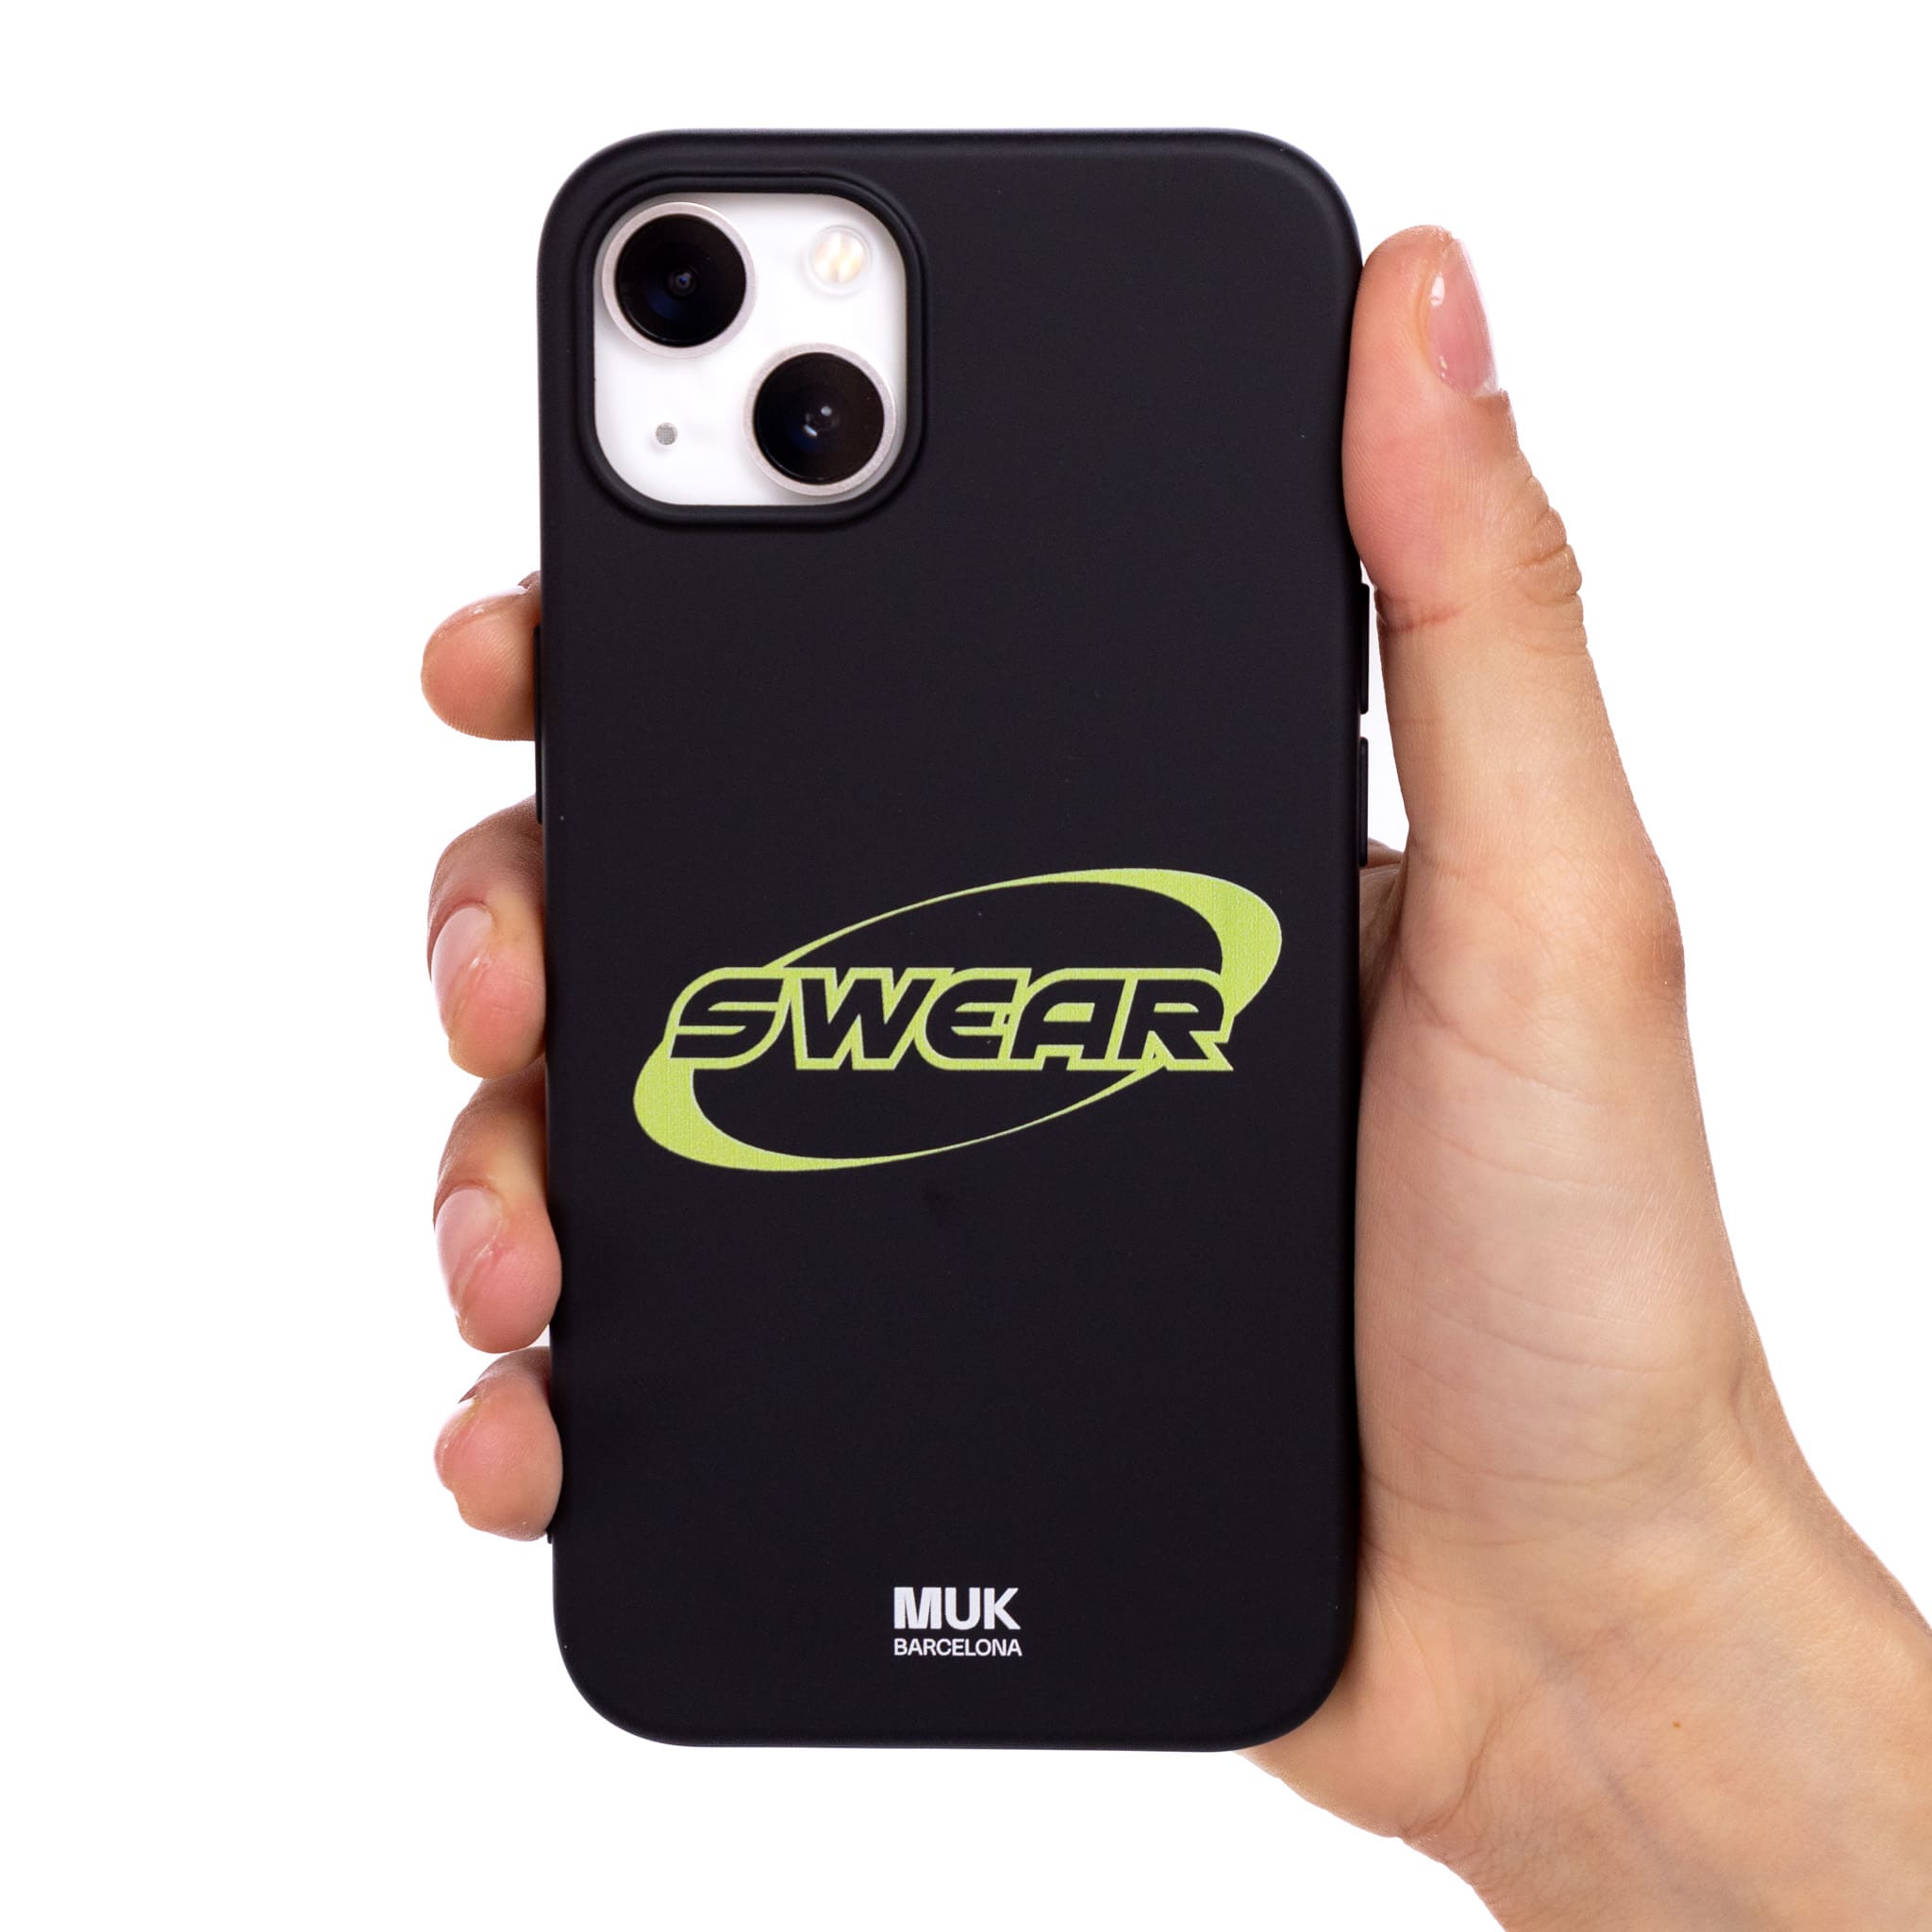  Black TPU  case with white "swear" text.
